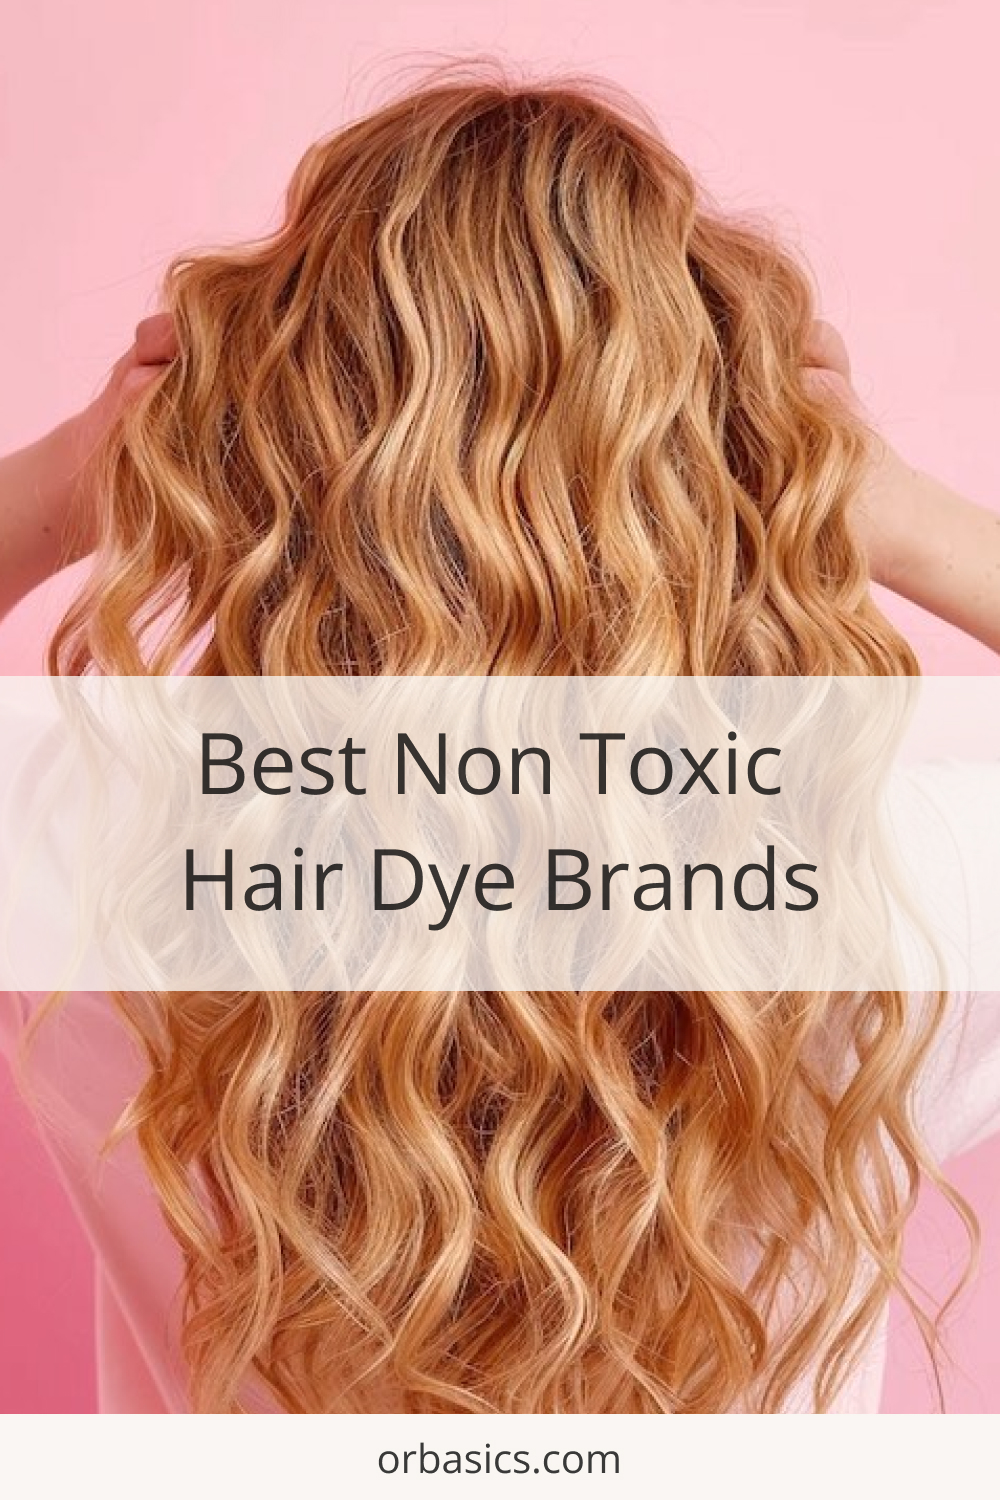 Non-Toxic and Natural Hair Dye Brands